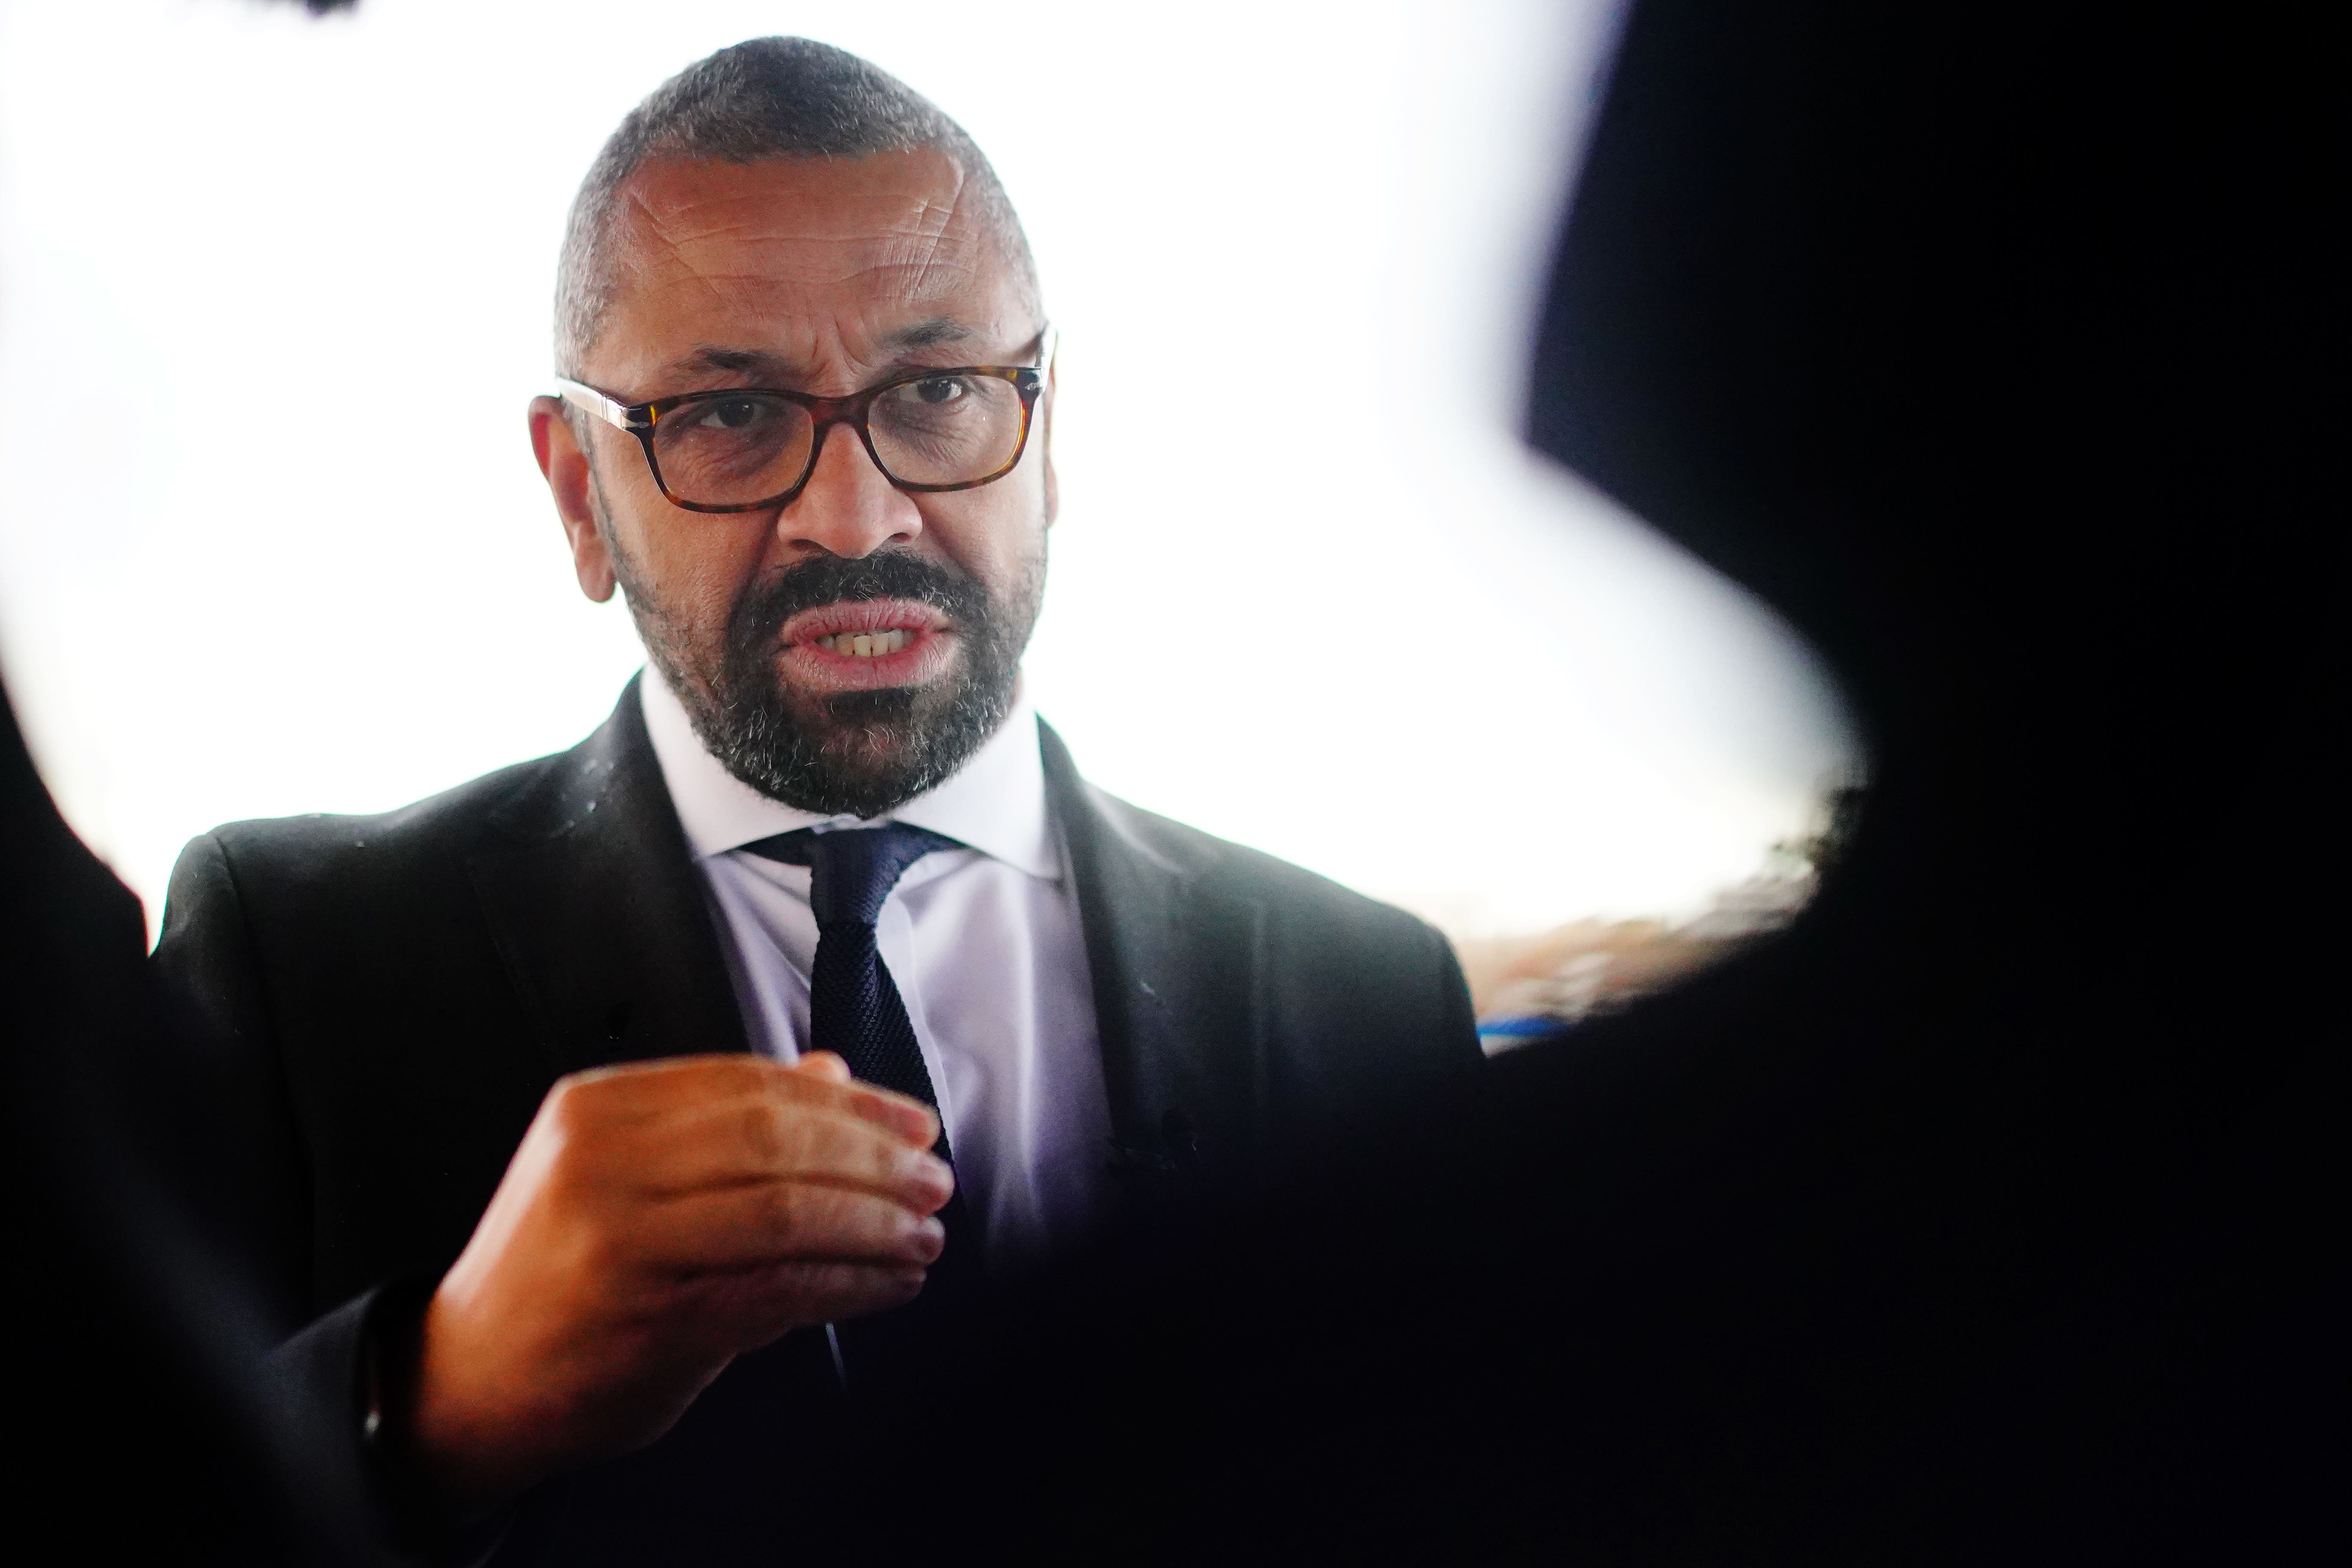 James Cleverly appeared to forget his past support for the resettlement of Syrian refugees